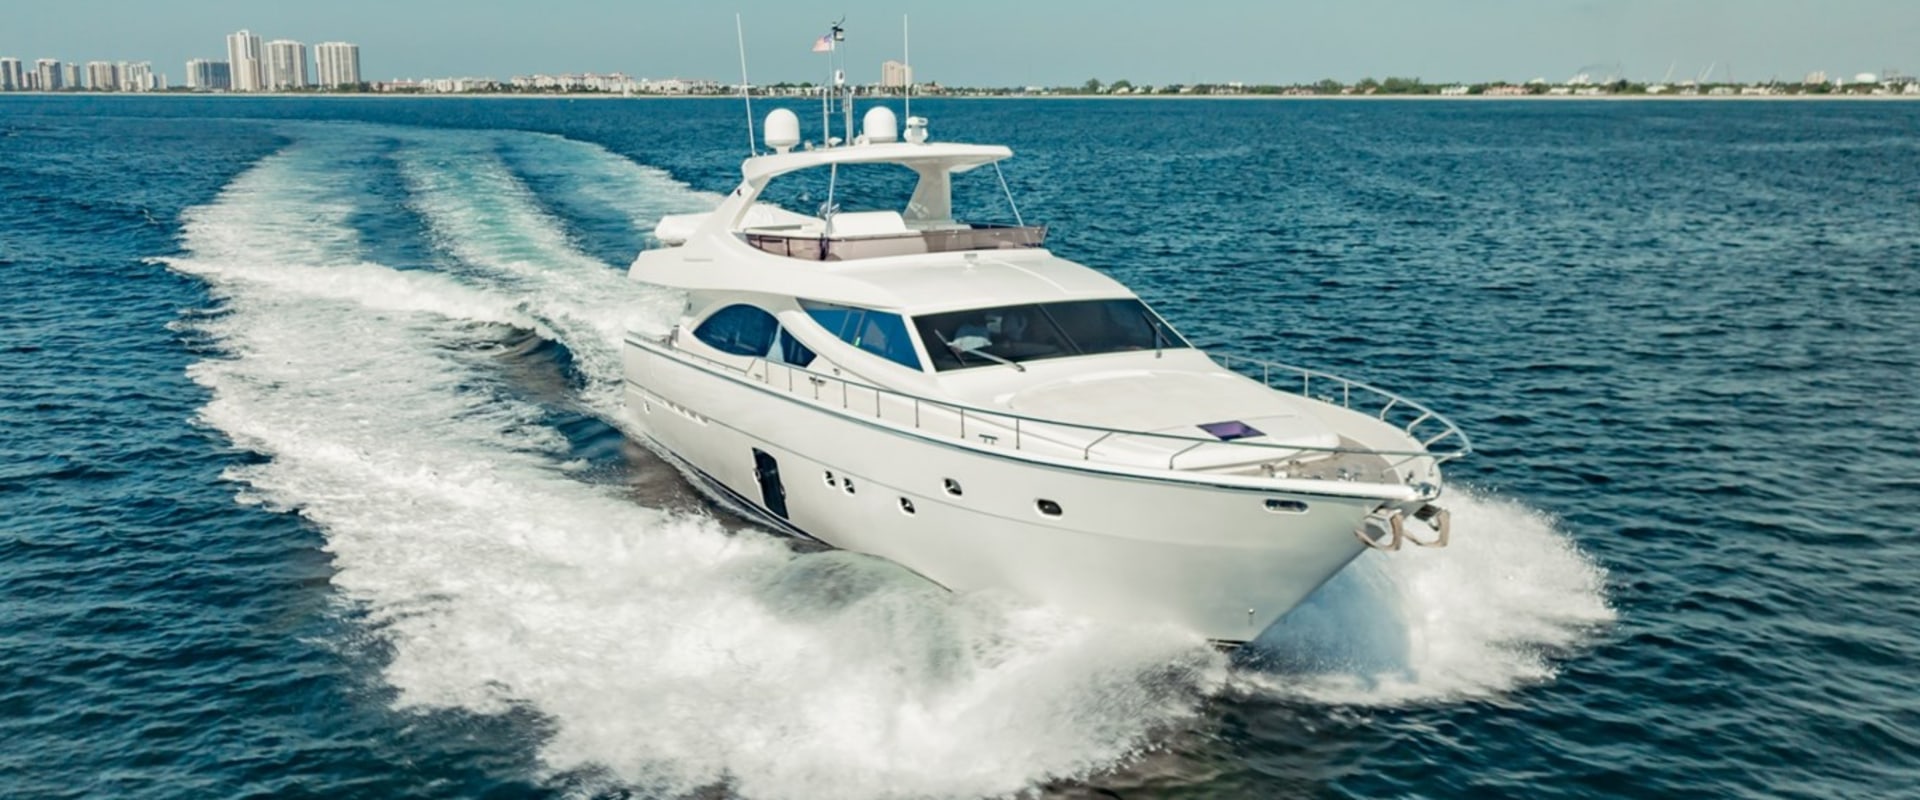 A Complete Look at Ferretti Yachts: The Ultimate Luxury Boat Manufacturer